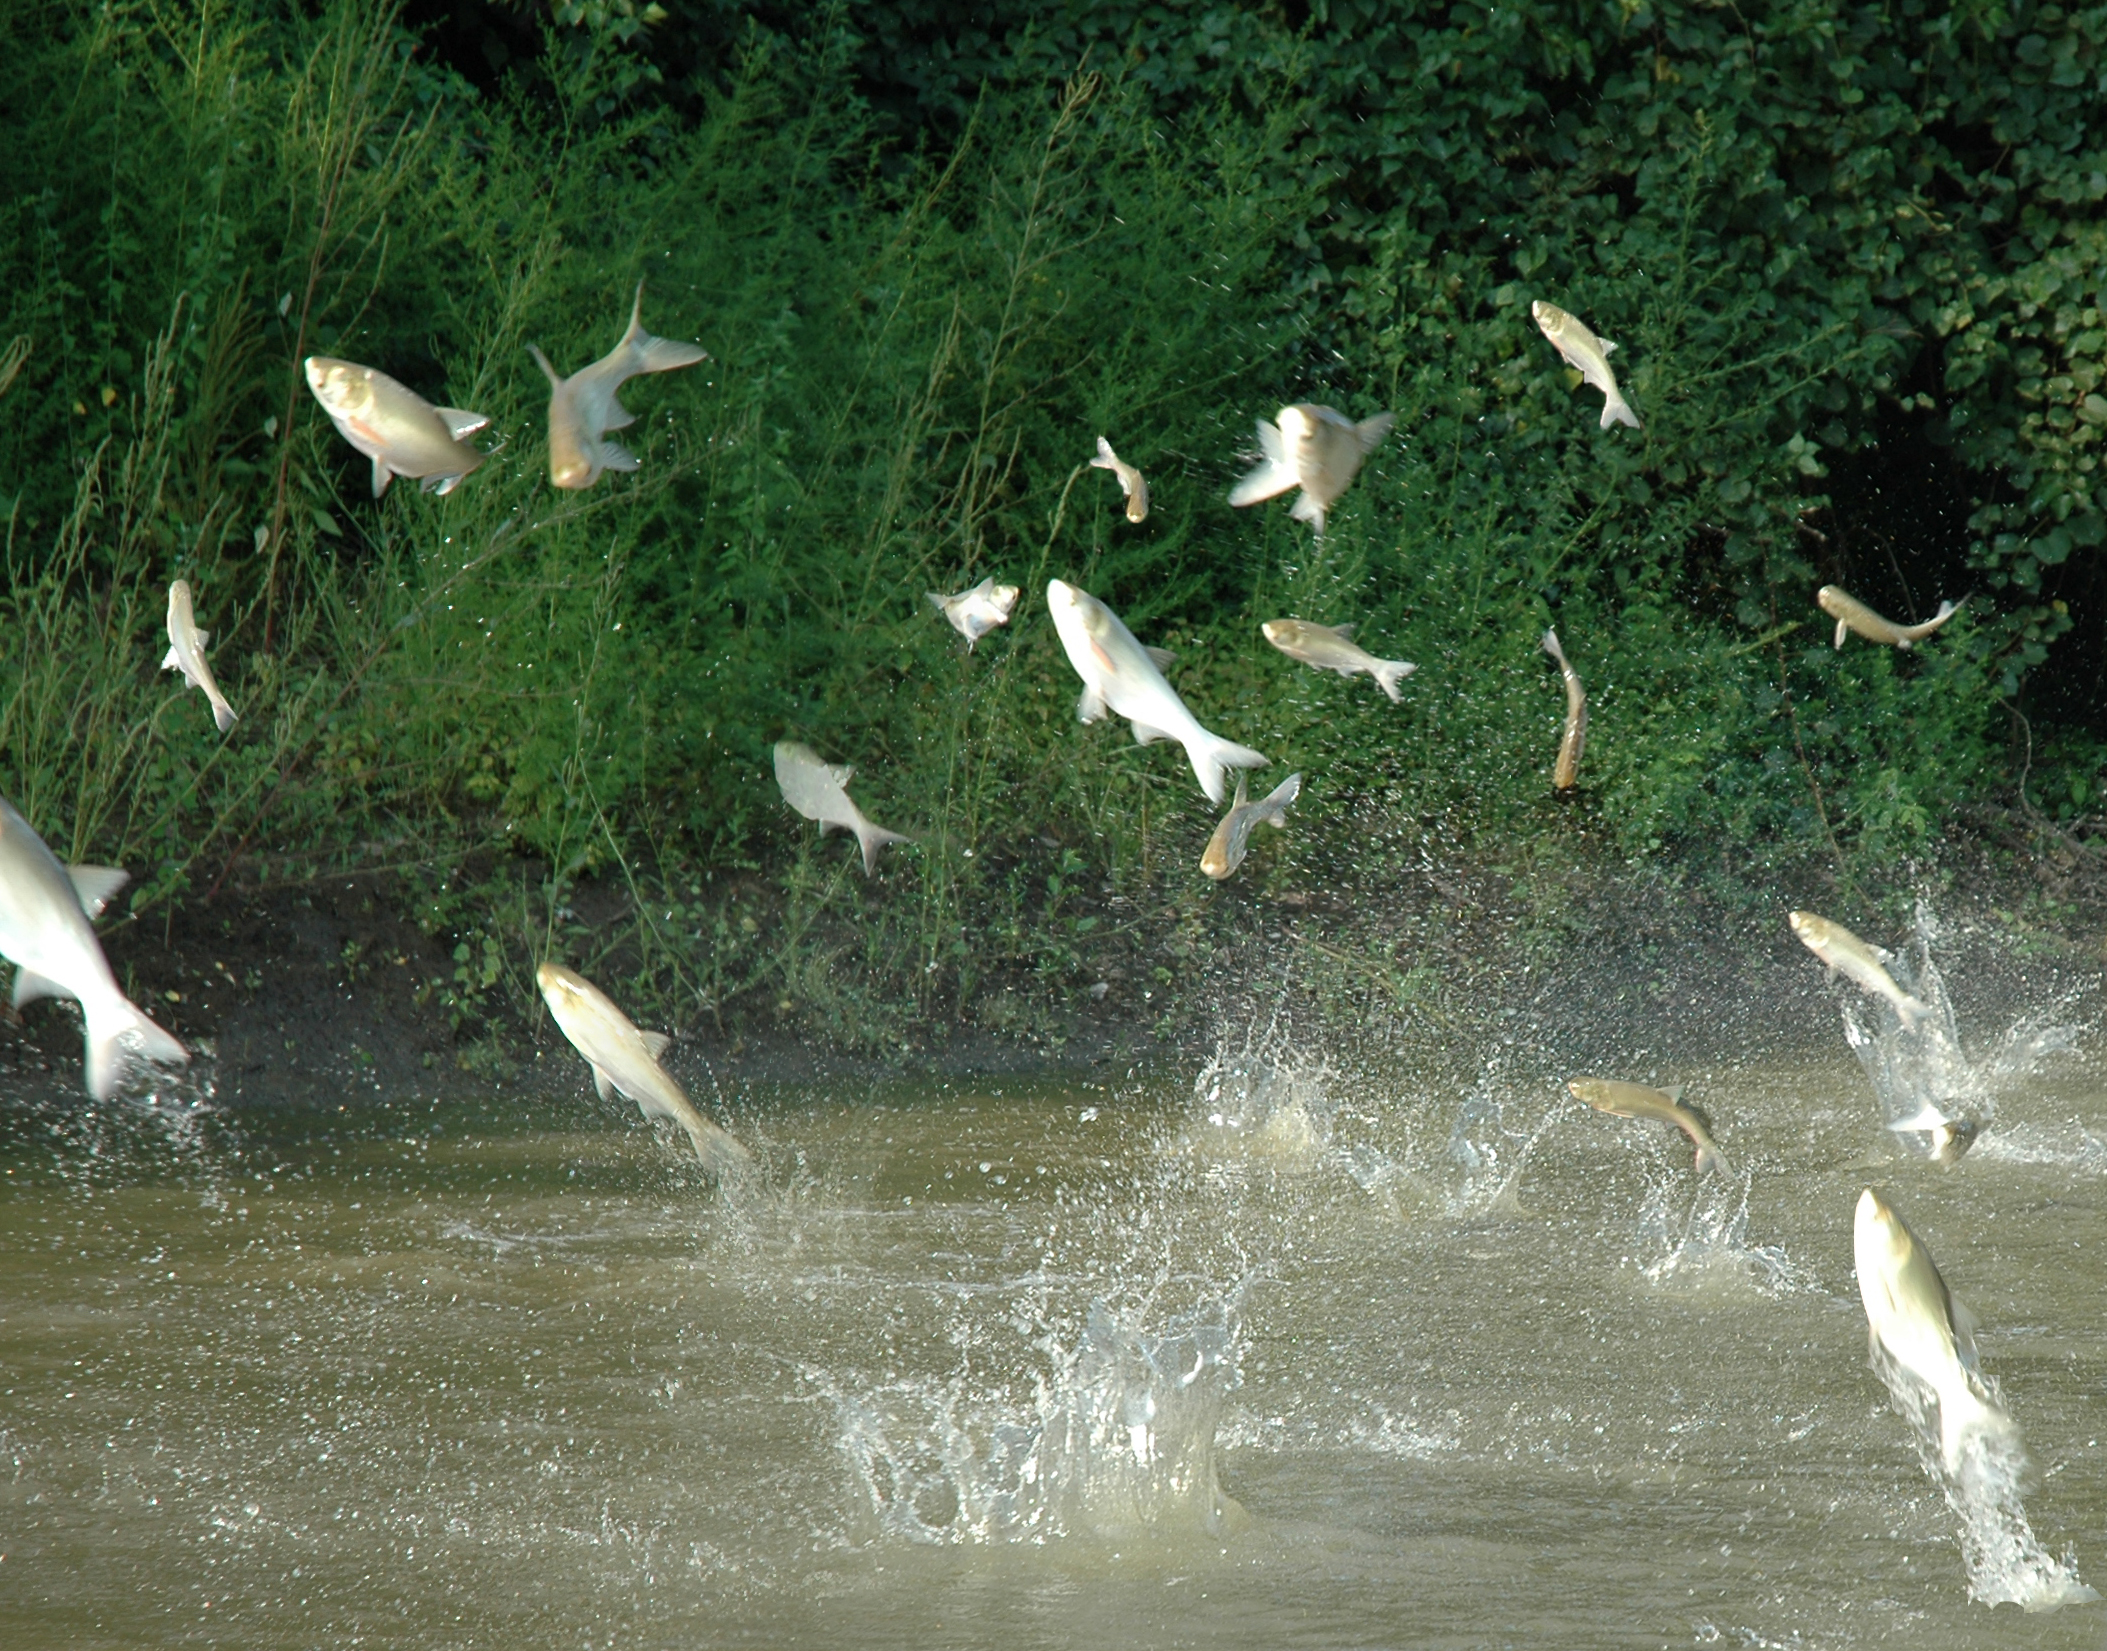 Invasive carp jumping out of the water